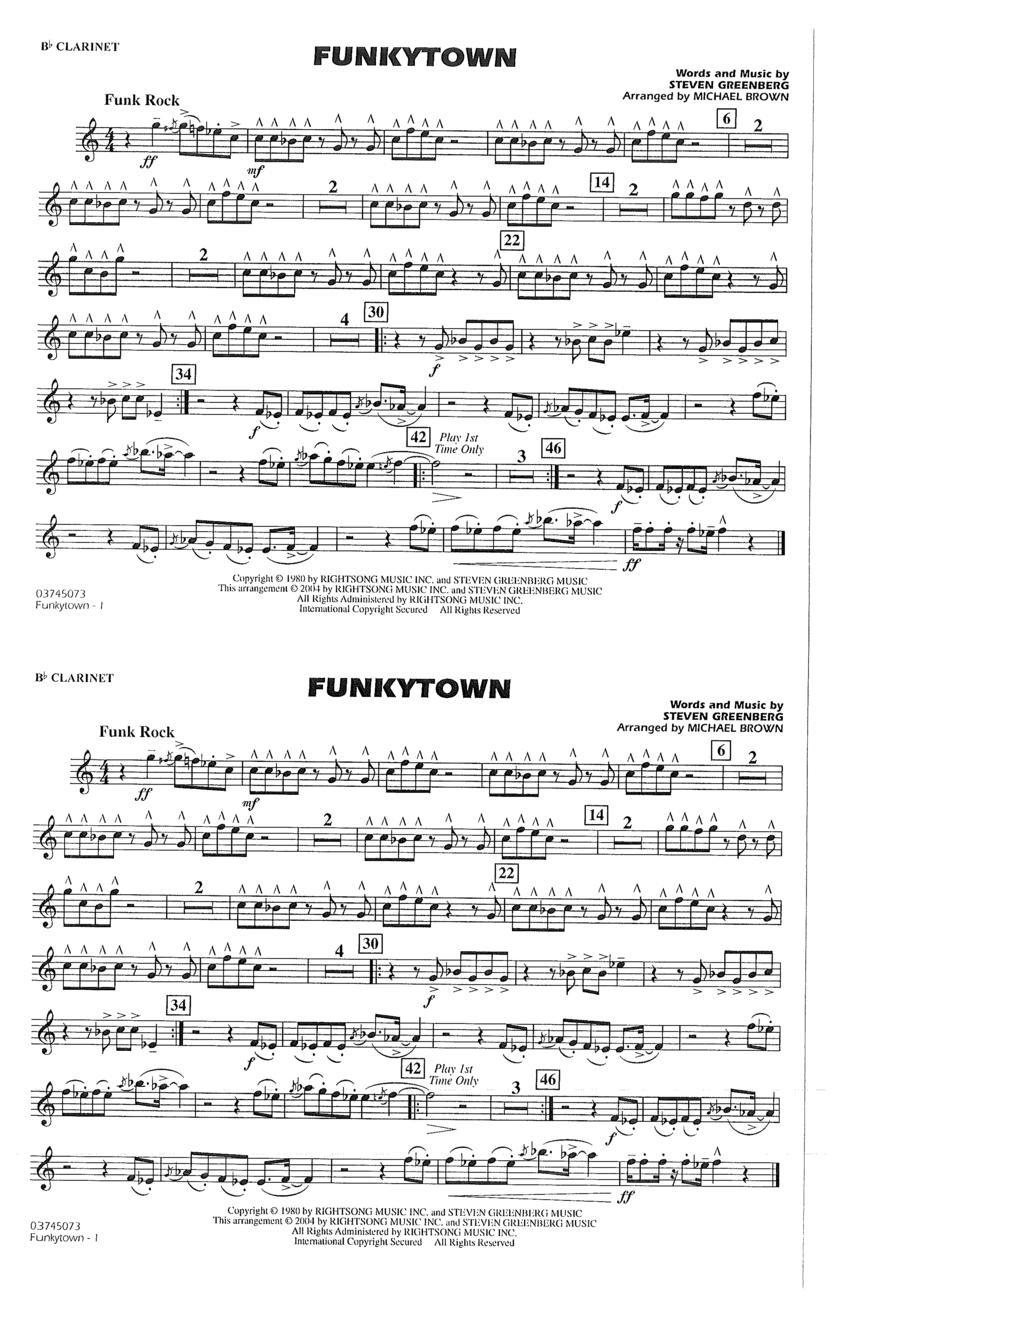 B CLARINET FOWIC OWM STEVEN GREE BERG Arranged by MICHAEL B OW Funkytown - I Copyrig t lyso by RIGHTSONG MUSIC INC. unci MUSIC This arrnngemem 201)4 by RIGHTSONG MUSIC INC.